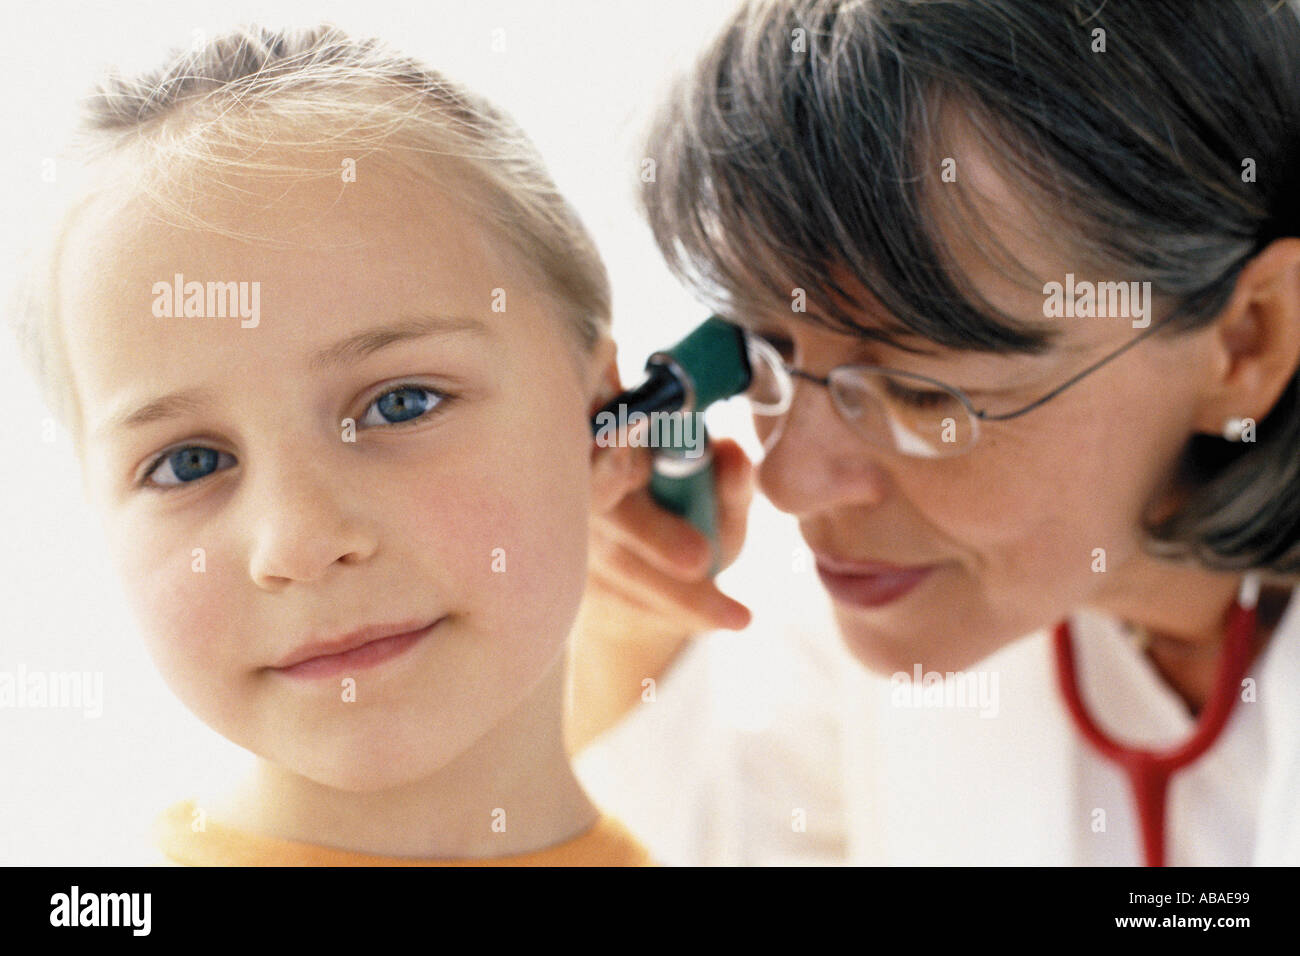 Girl being examined by doctor Stock Photo